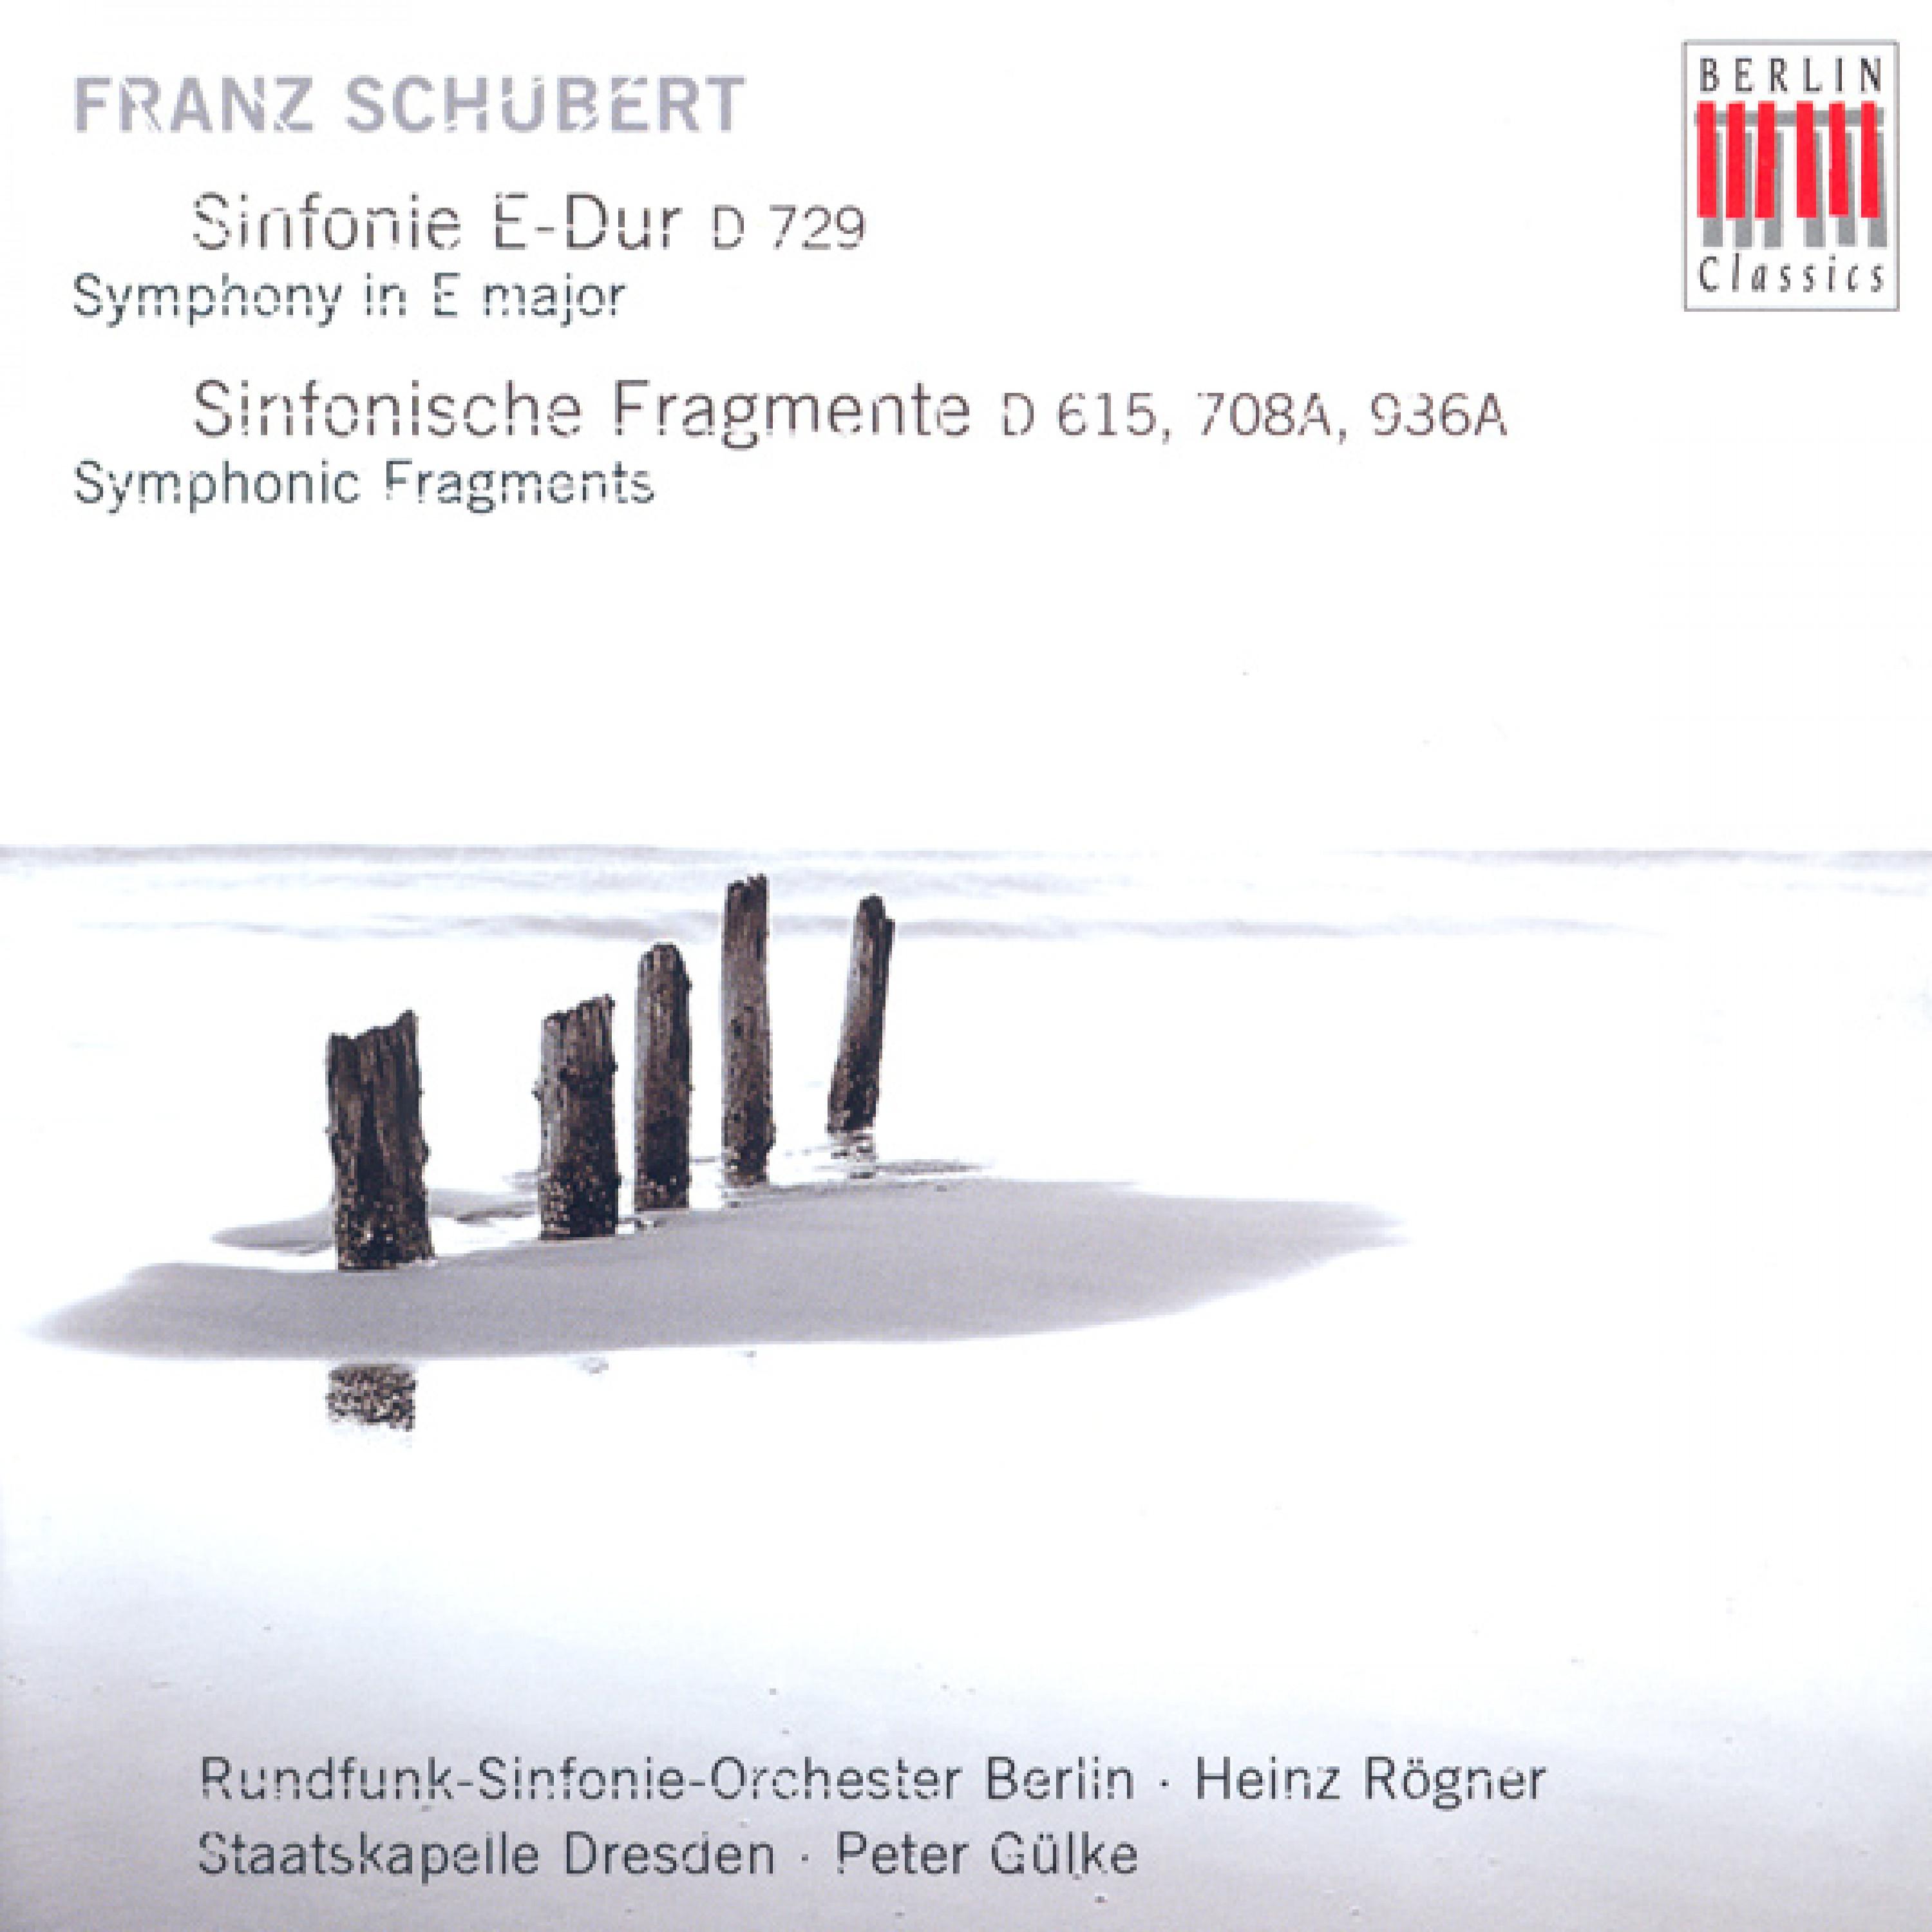 Variations and Fugue On a Theme of Mozart, Op. 132: Variation 4 - Vivace